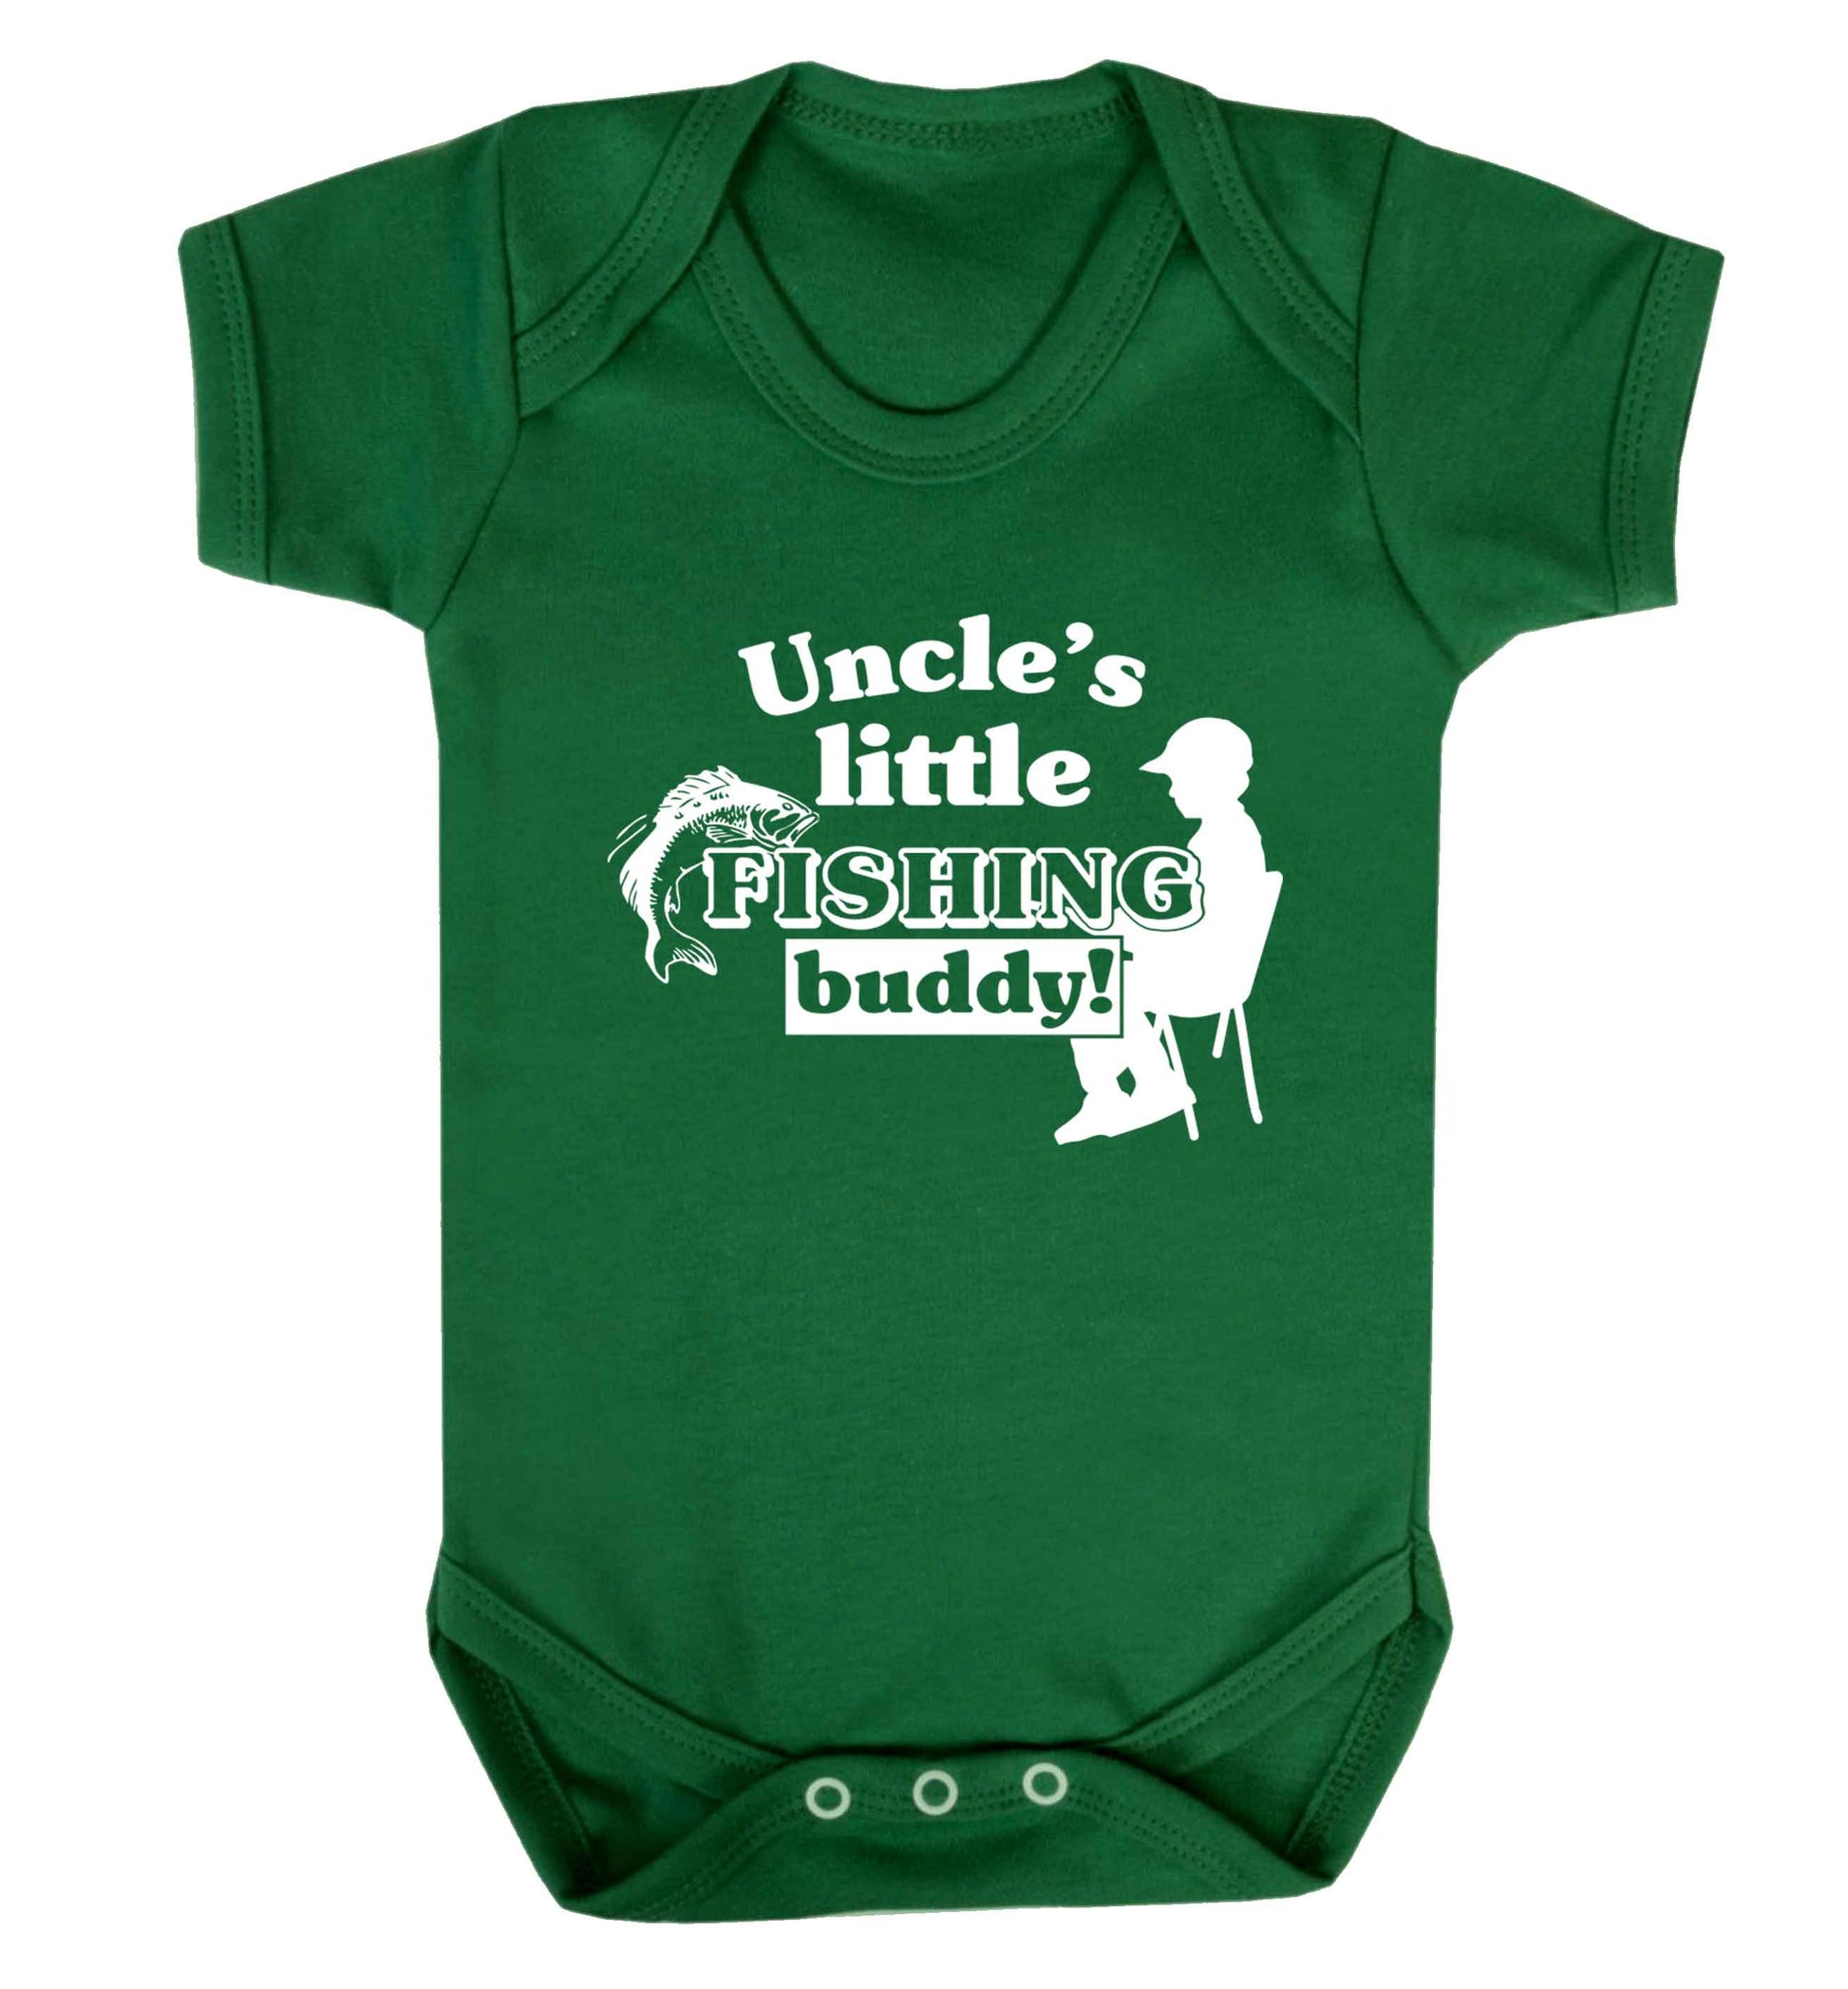 Uncle's little fishing buddy Baby Vest green 18-24 months